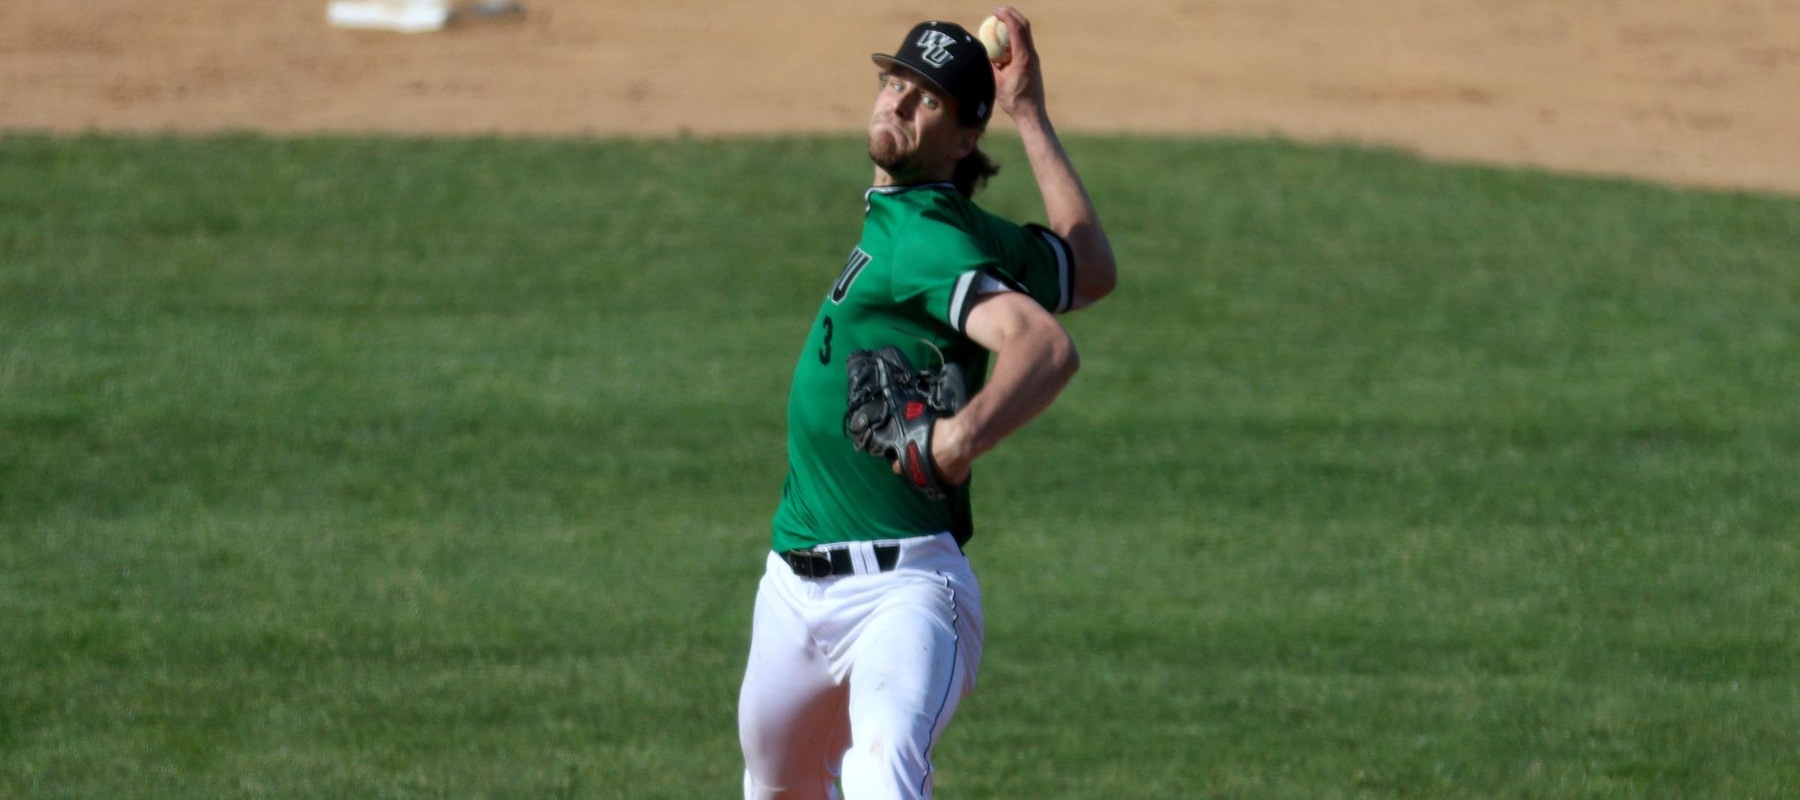 Photo of Ryan Sandberg pitching against Jefferson on Tuesday at Wilson Field. Copyright 2022; Wilmington University. All rights reserved. Photo by Dan Lauletta. March 22, 2022.